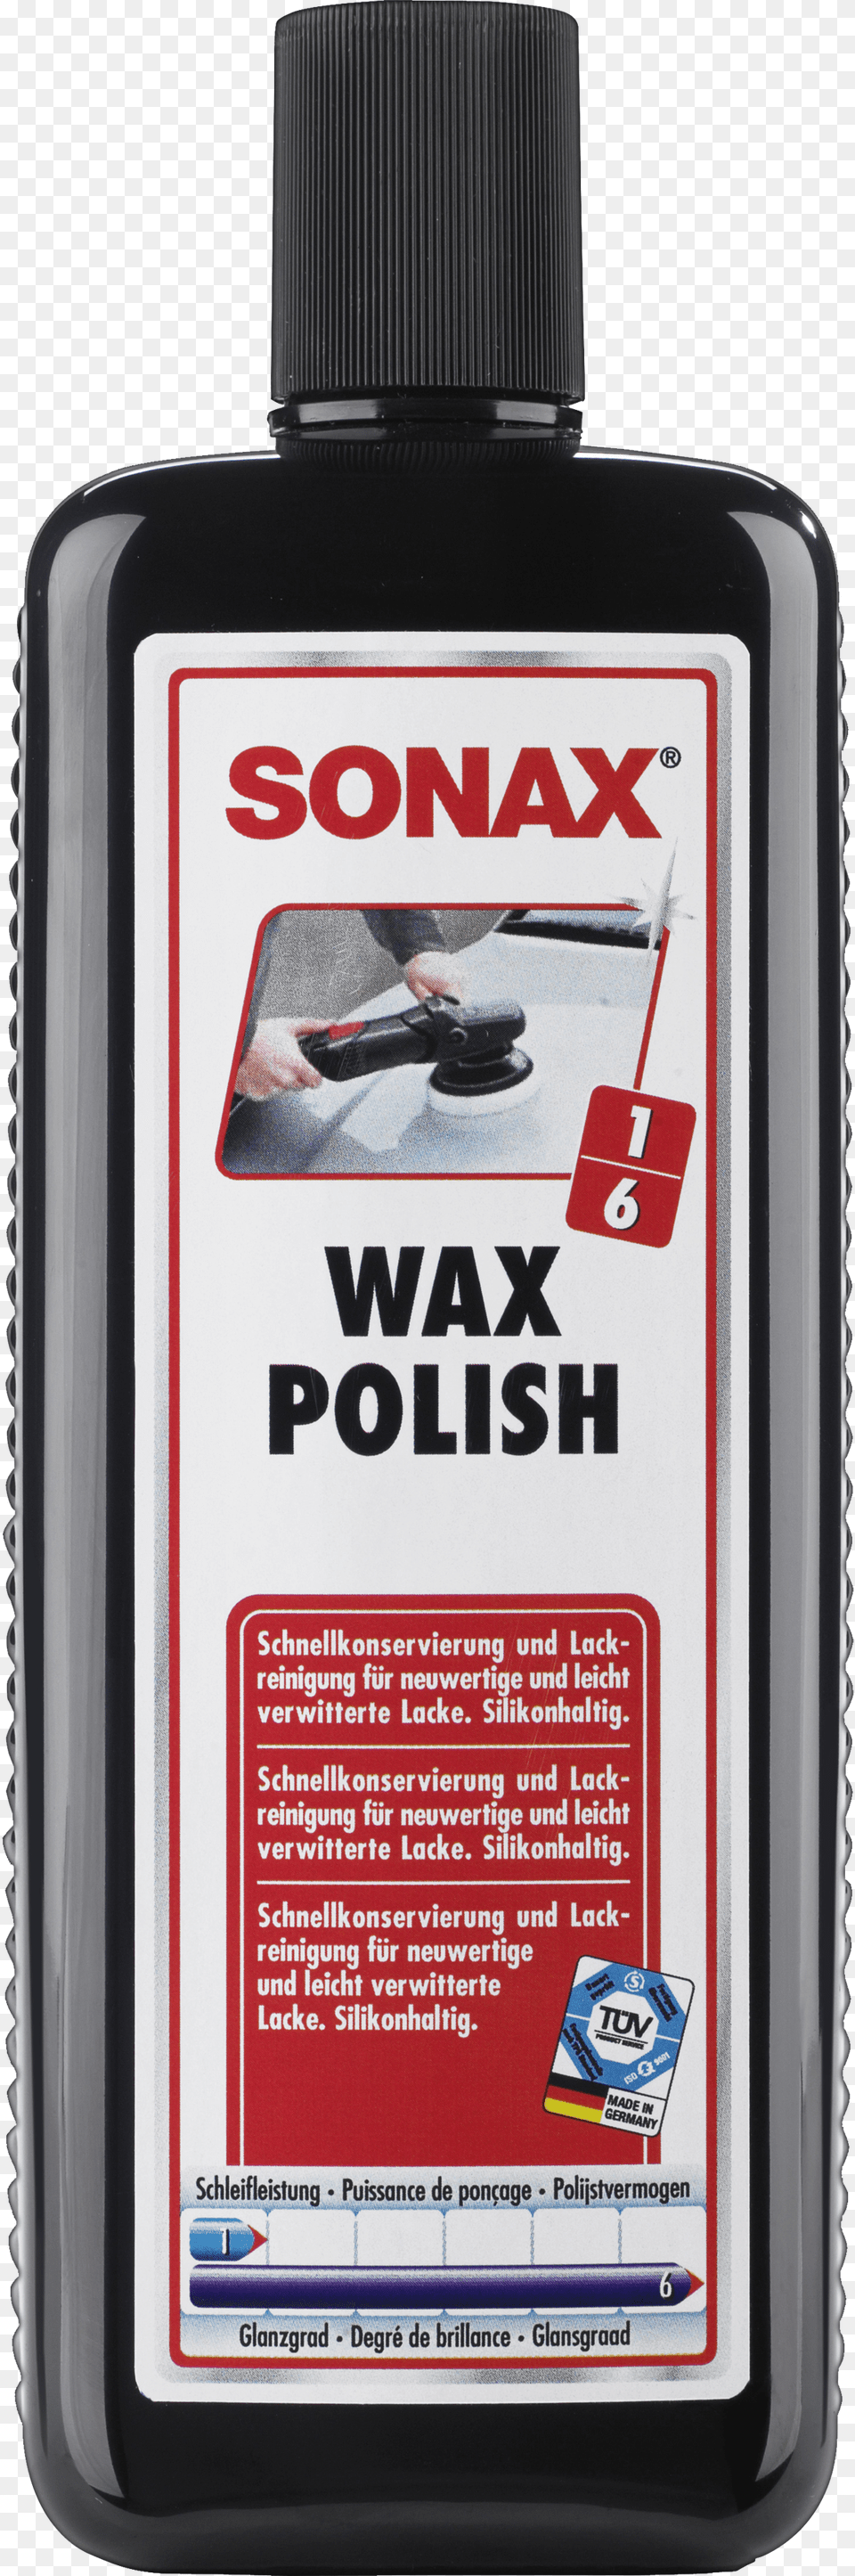 Rapid Wax Conservation And Paintwork Cleaning For Nearly Sonax Ampon S Voskem Koncentrt 500 Ml, Bottle, Cosmetics, Perfume, Aftershave Free Png Download